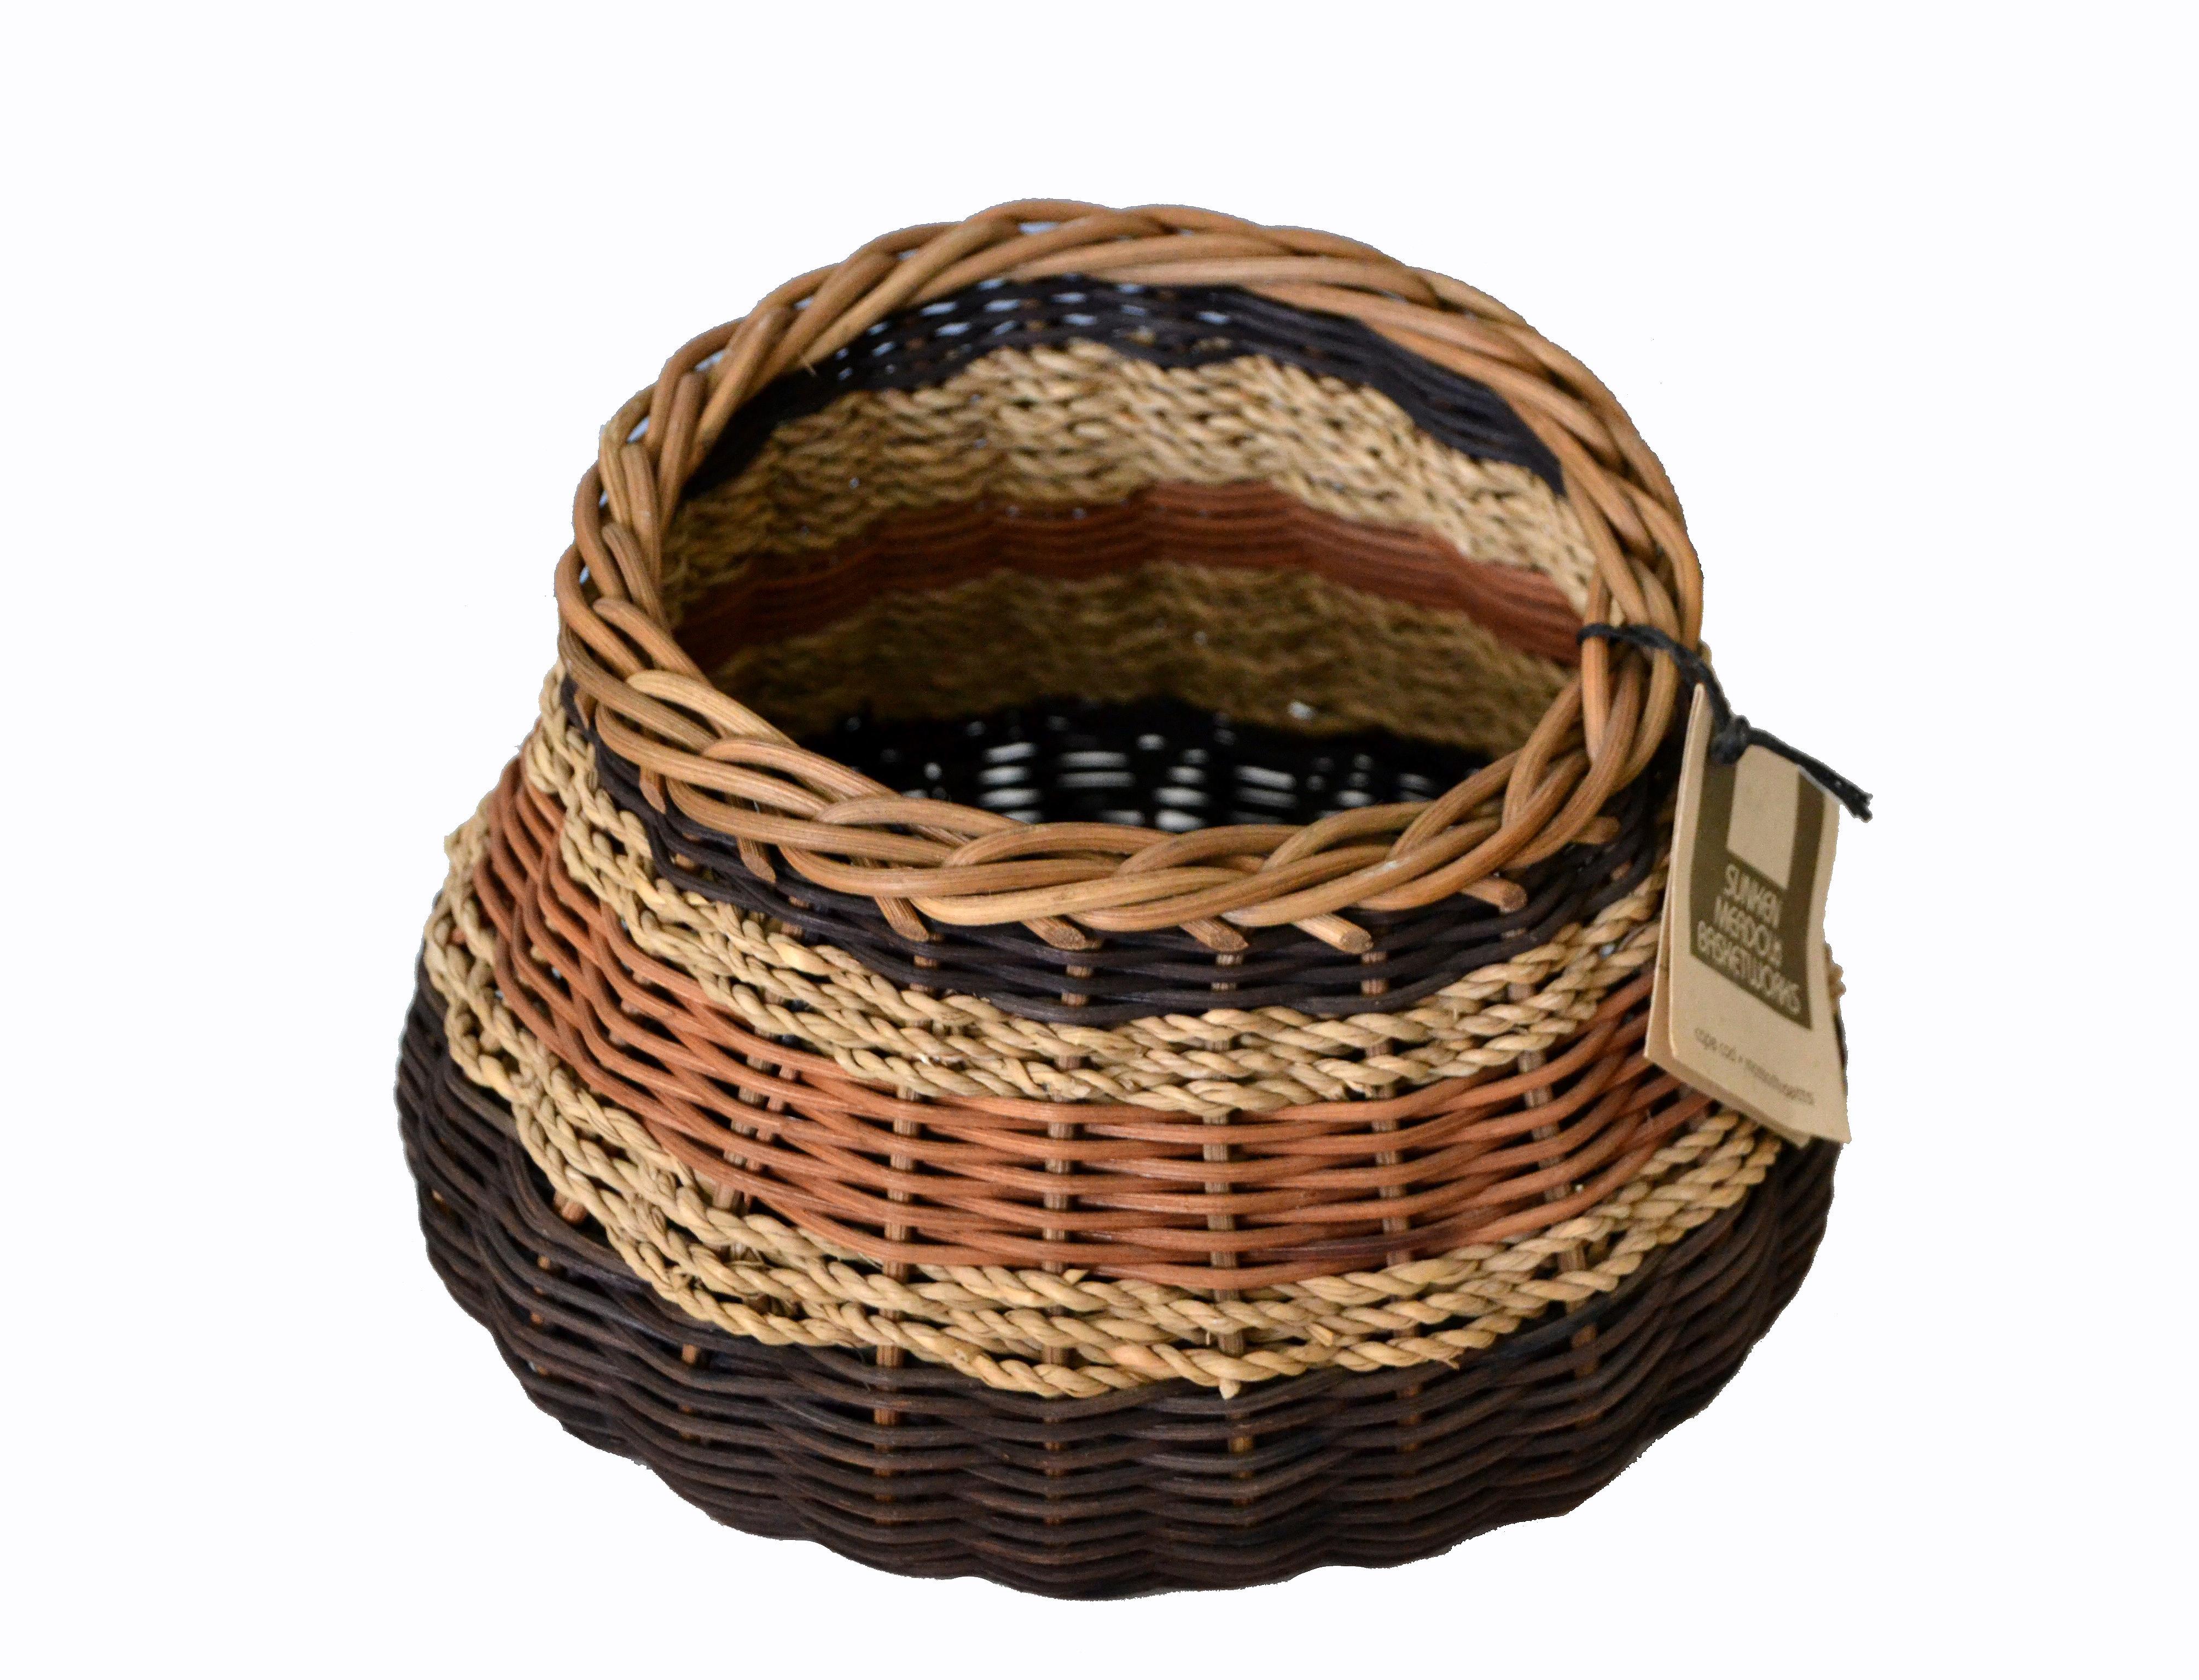 American Boho Chic Handcrafted Woven Reed and Seagrass Nancy Basket by Paulette Lenney  For Sale